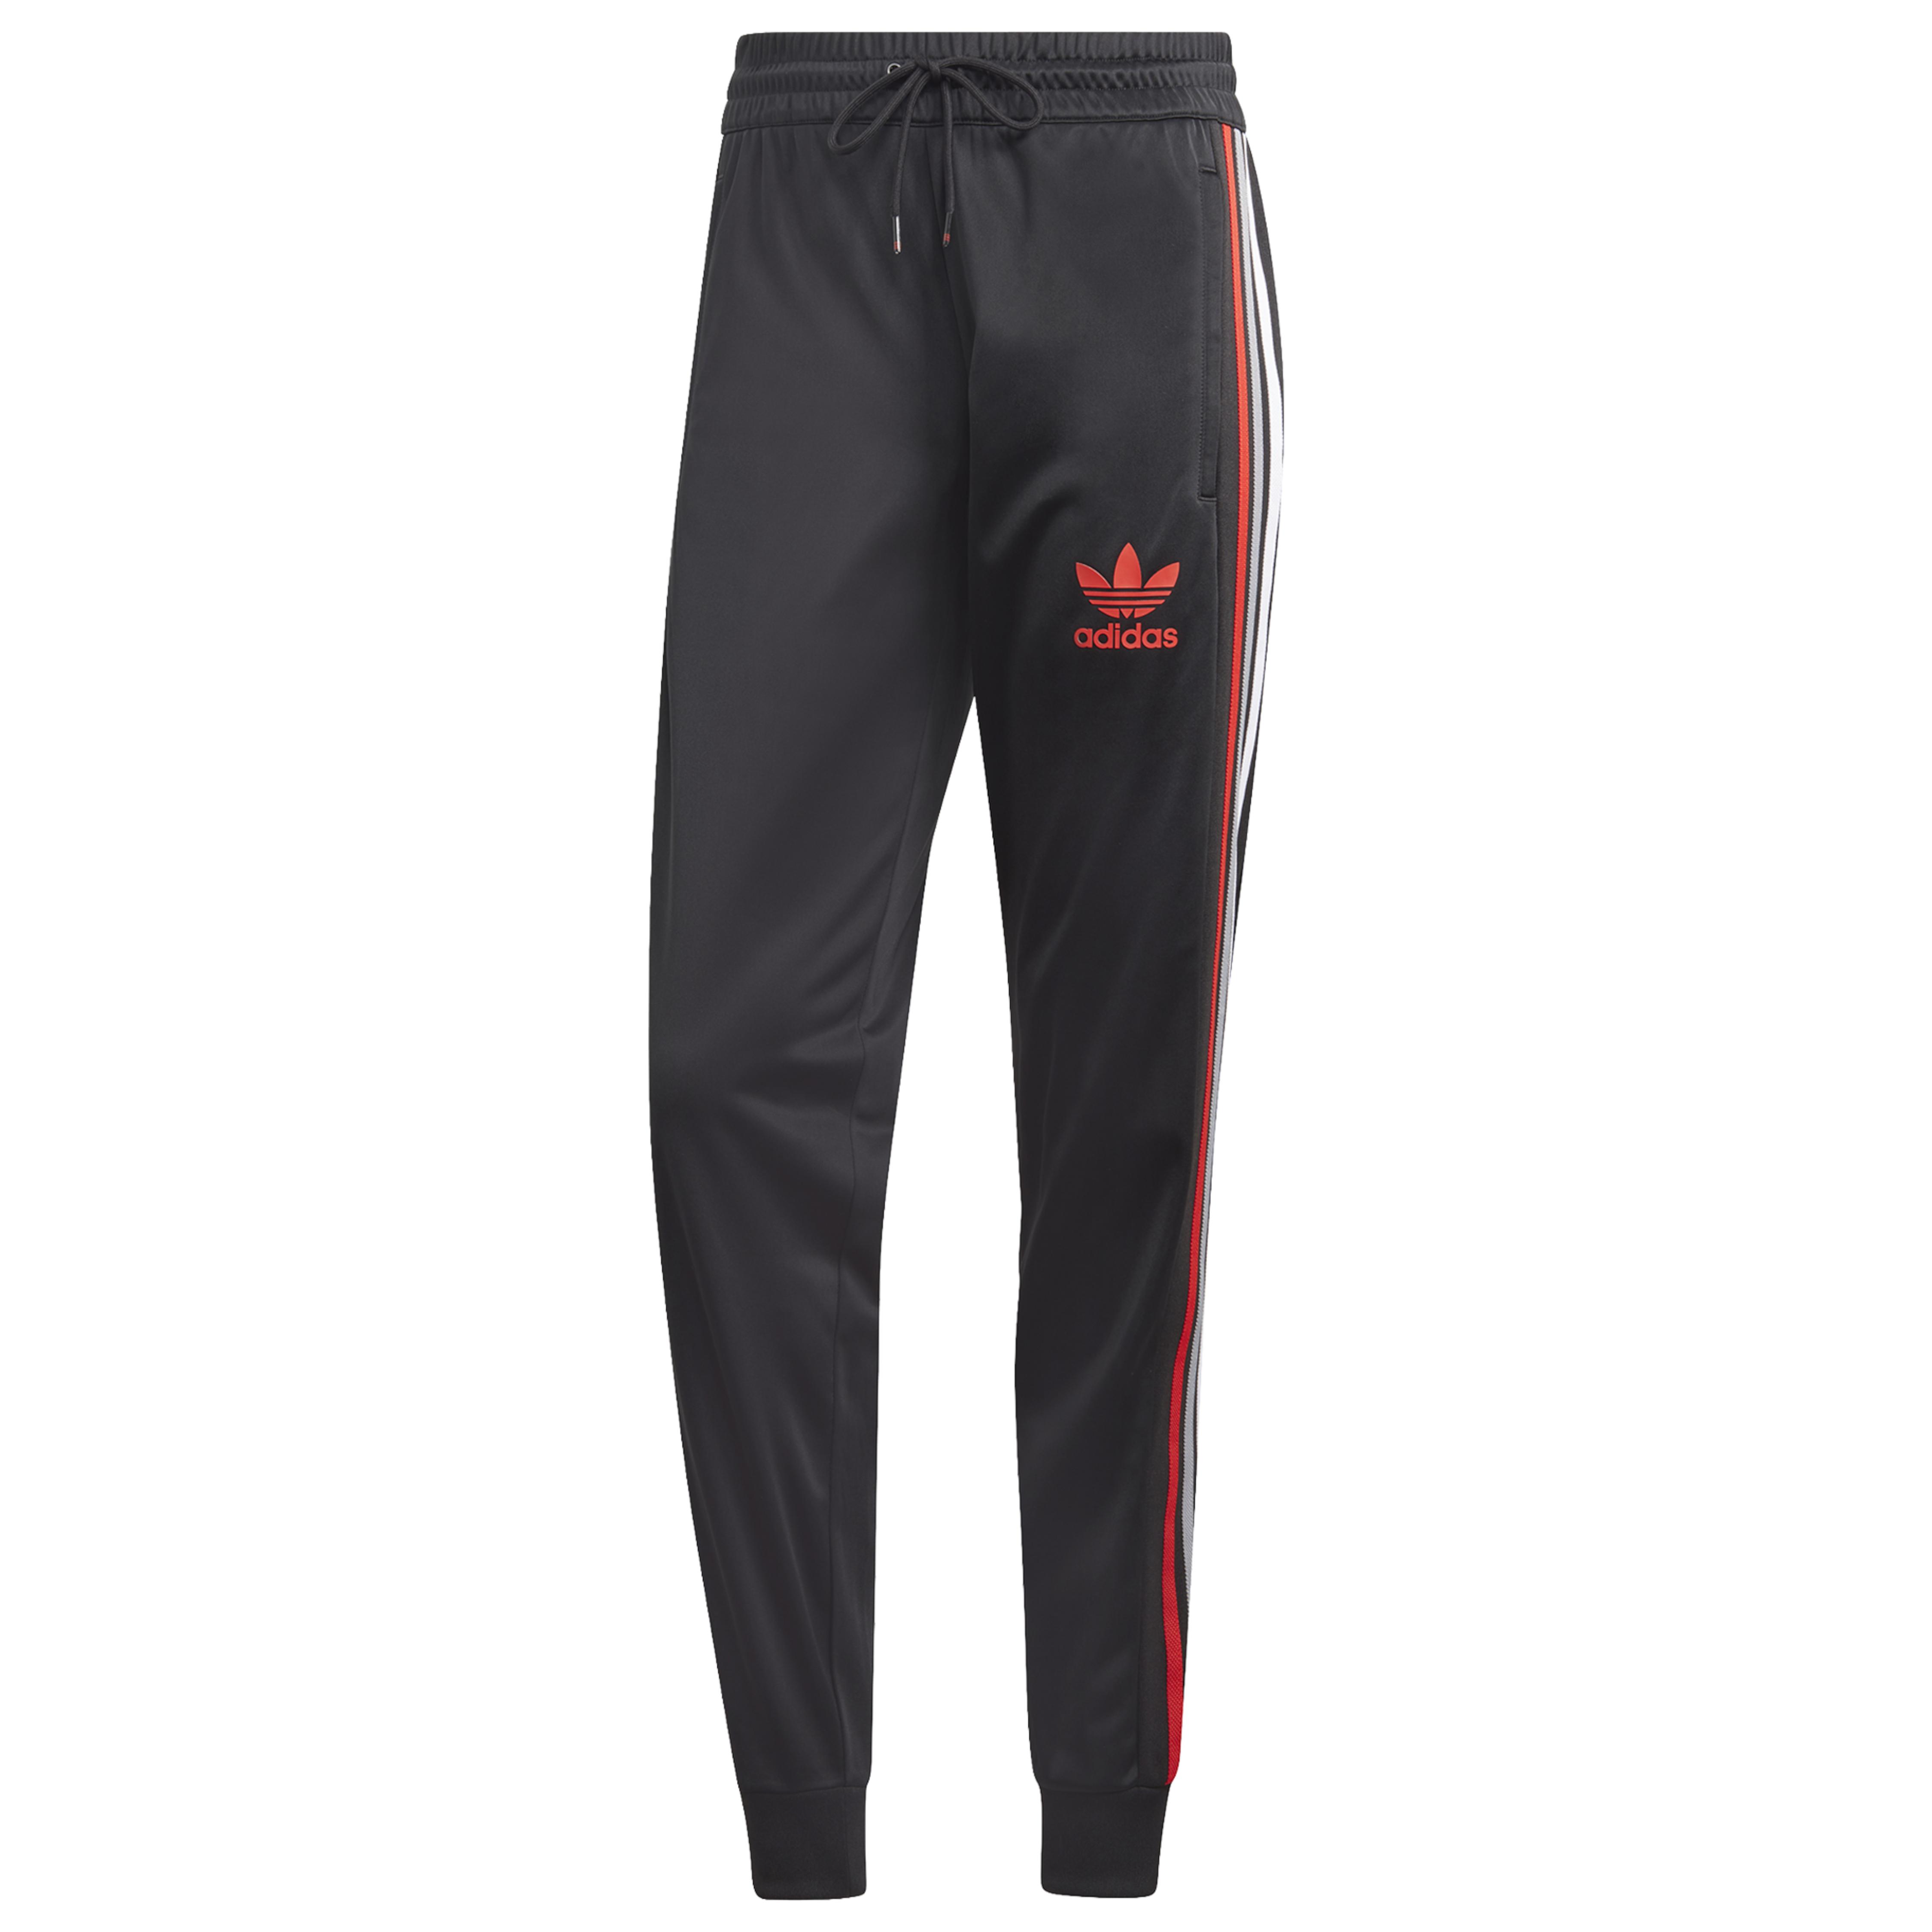 adidas Originals Synthetic Chile 20 Track Pants in Black/Red (Black) for  Men - Save 45% - Lyst